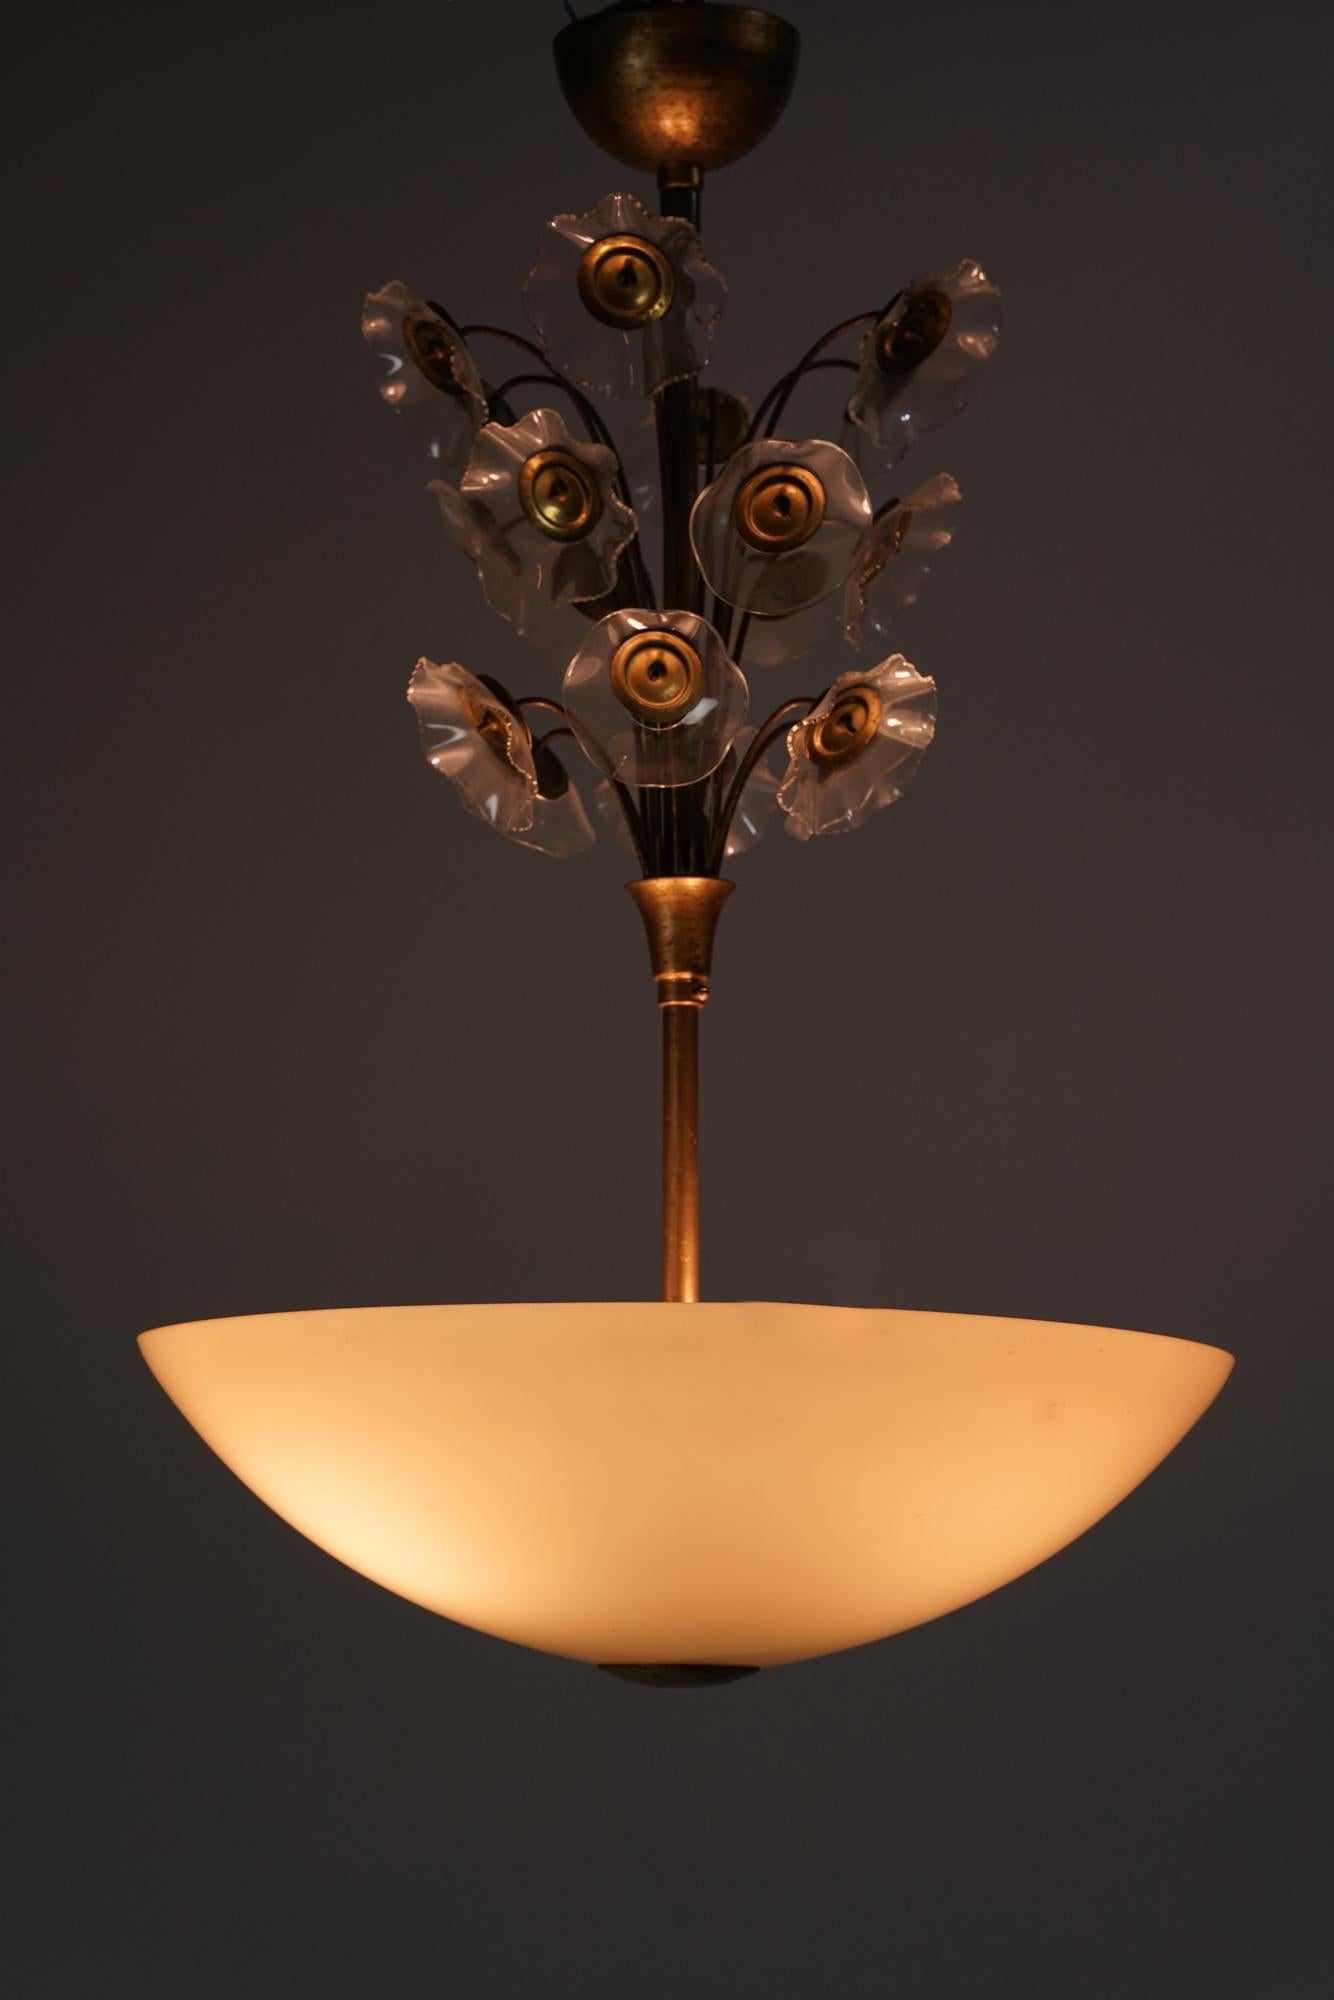 Rare floral chandelier, by Lisa Johansson-Pape from the 1940s. Glass and brass. Beautiful intricate flower details. Good vintage condition, minor patina consistent with age and use. Classic Lisa Johansson-pape design suitable for many spaces. 

Lisa